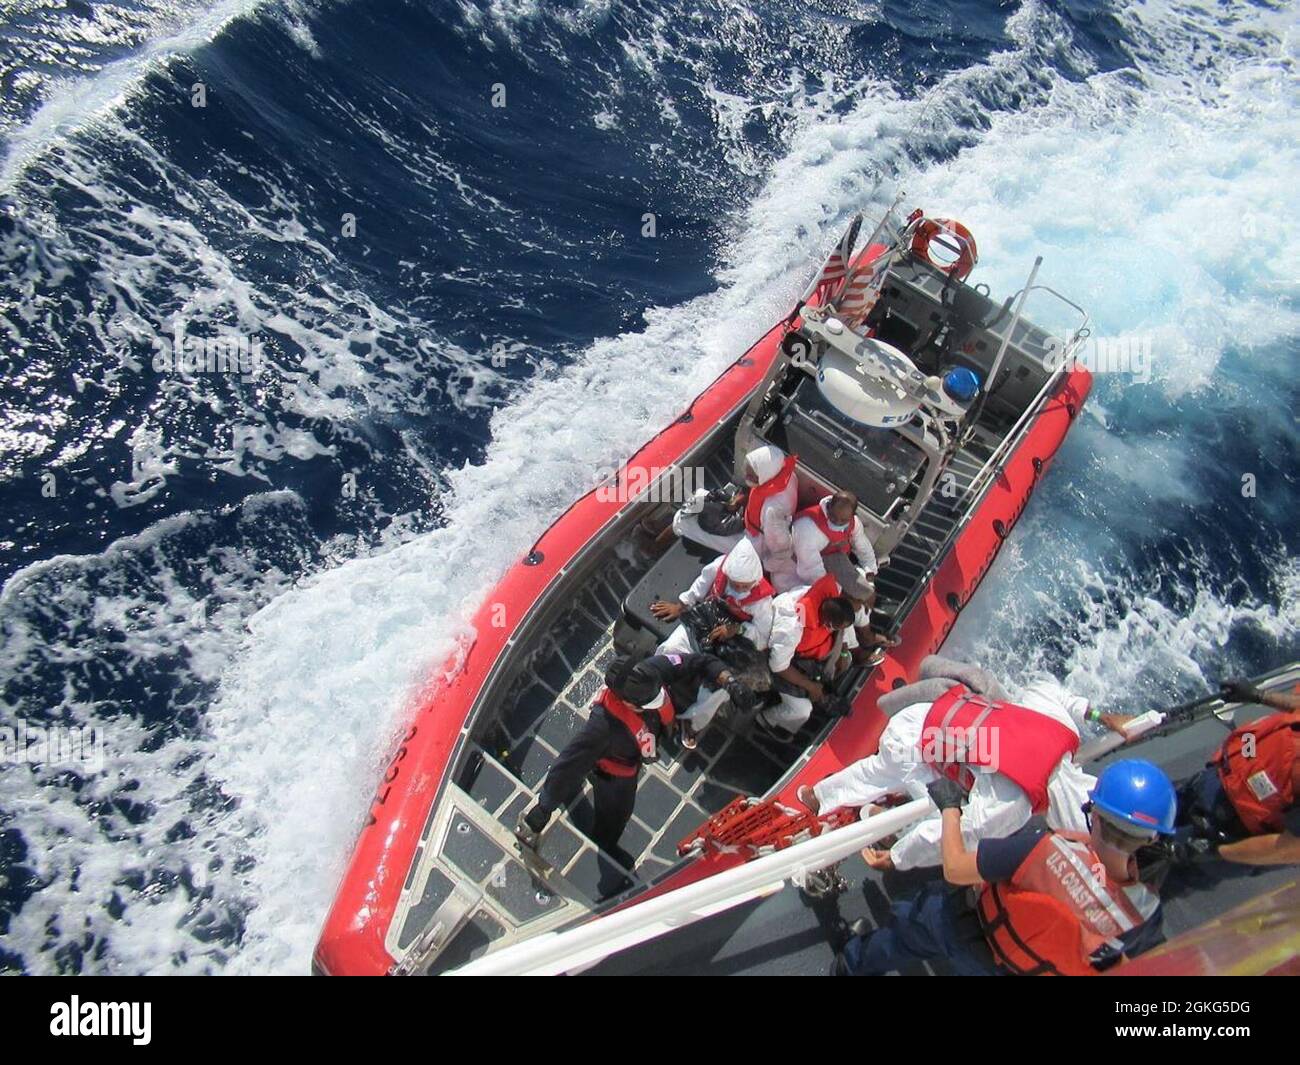 Coast Guard Cutter Joseph Napier crewmembers work to repatriate 15 illegal migrants, 12 men and three women, to the Dominican Republic Navy patrol boat (Capella-108) in waters just off the Dominican Republic April 14, 2021.  The Coast Guard Cutter Paul Clark interdicted the migrant group the evening of April 13, 2021 aboard a makeshift vessel in the Mona Passage. Stock Photo